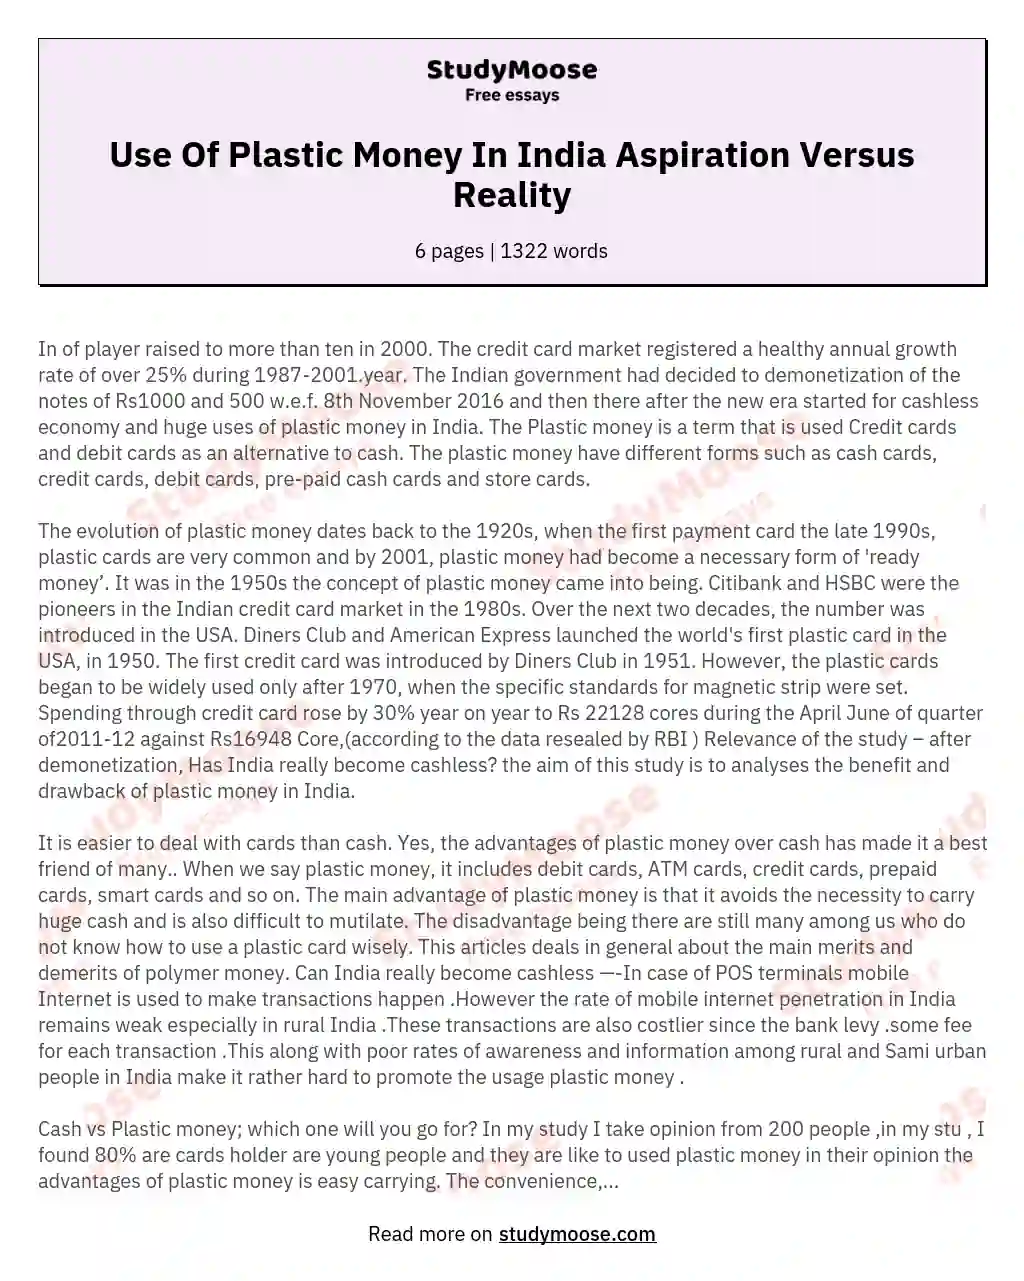 Use Of Plastic Money In India Aspiration Versus Reality essay